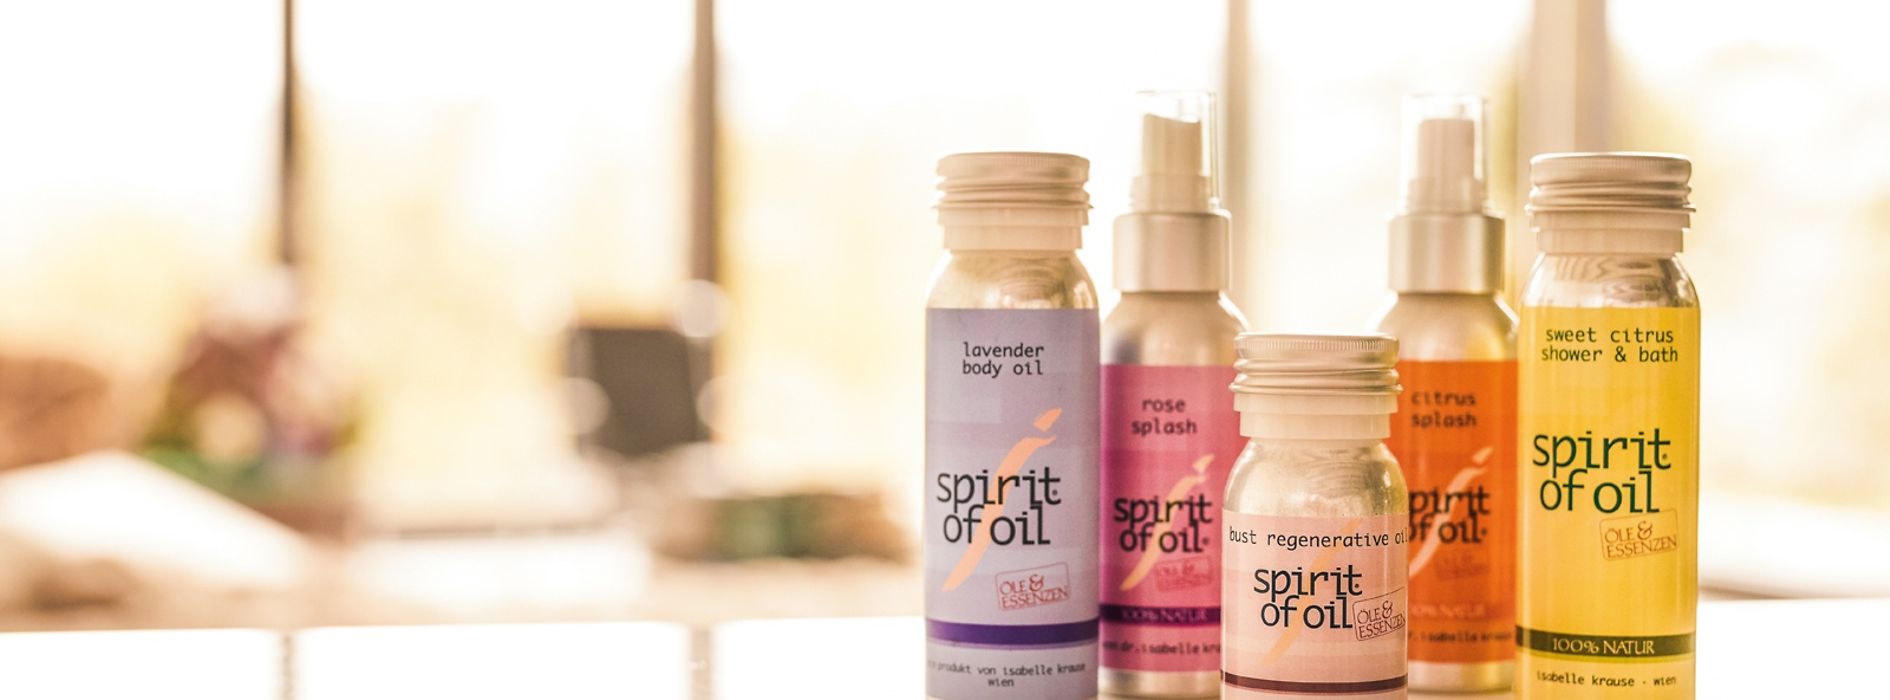 spirit of oil, body care products